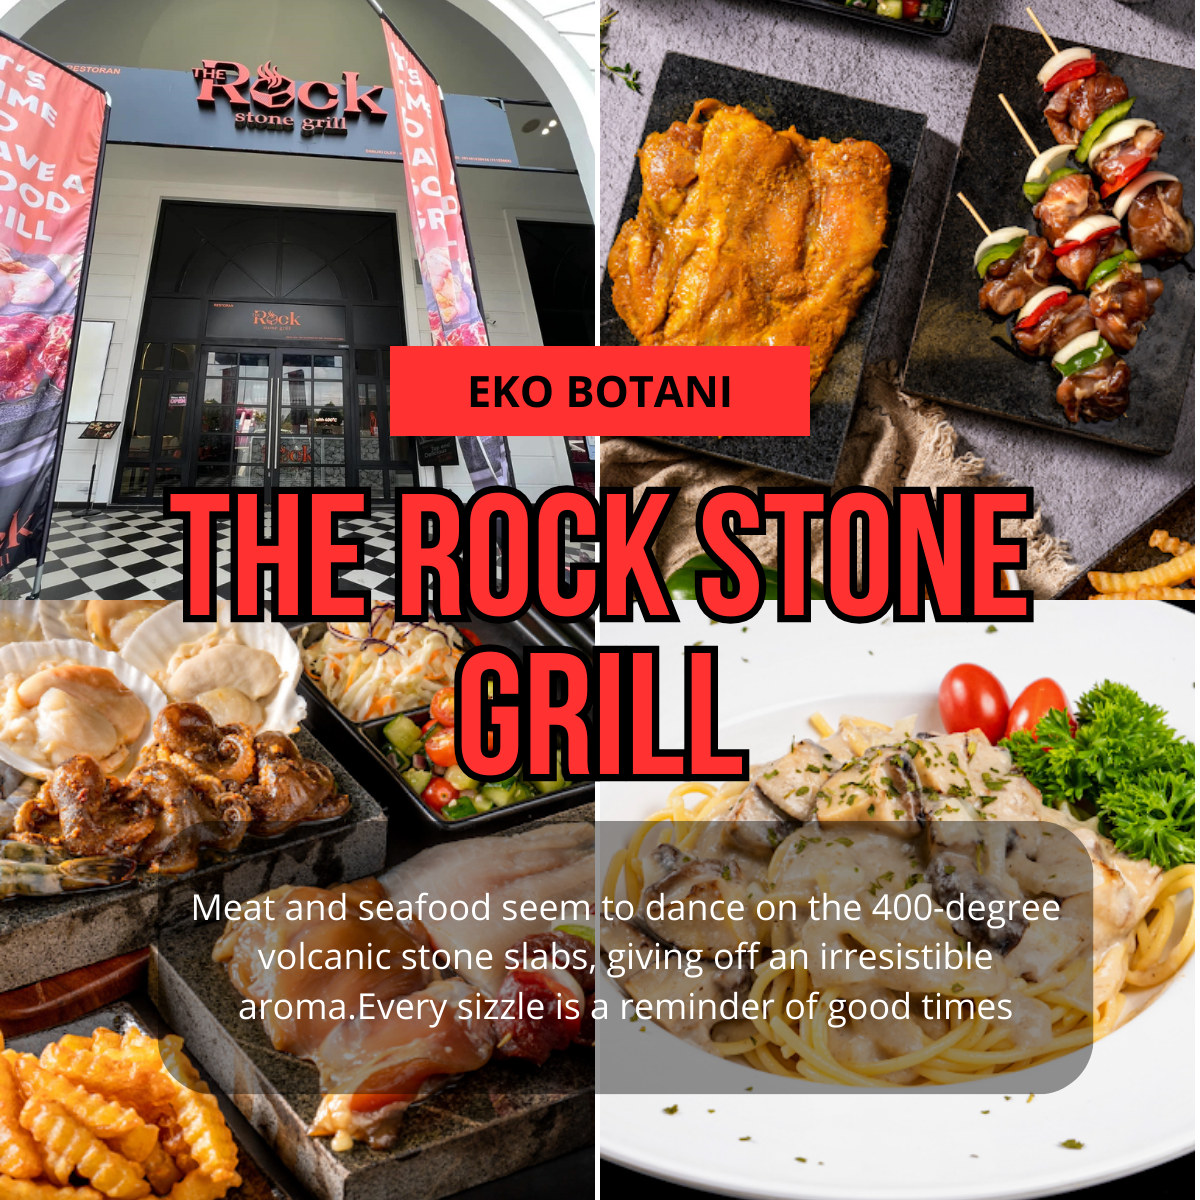 The Rock Stone Grill in Eco Galleria: A Culinary Adventure in Volcanic Stone Cooking